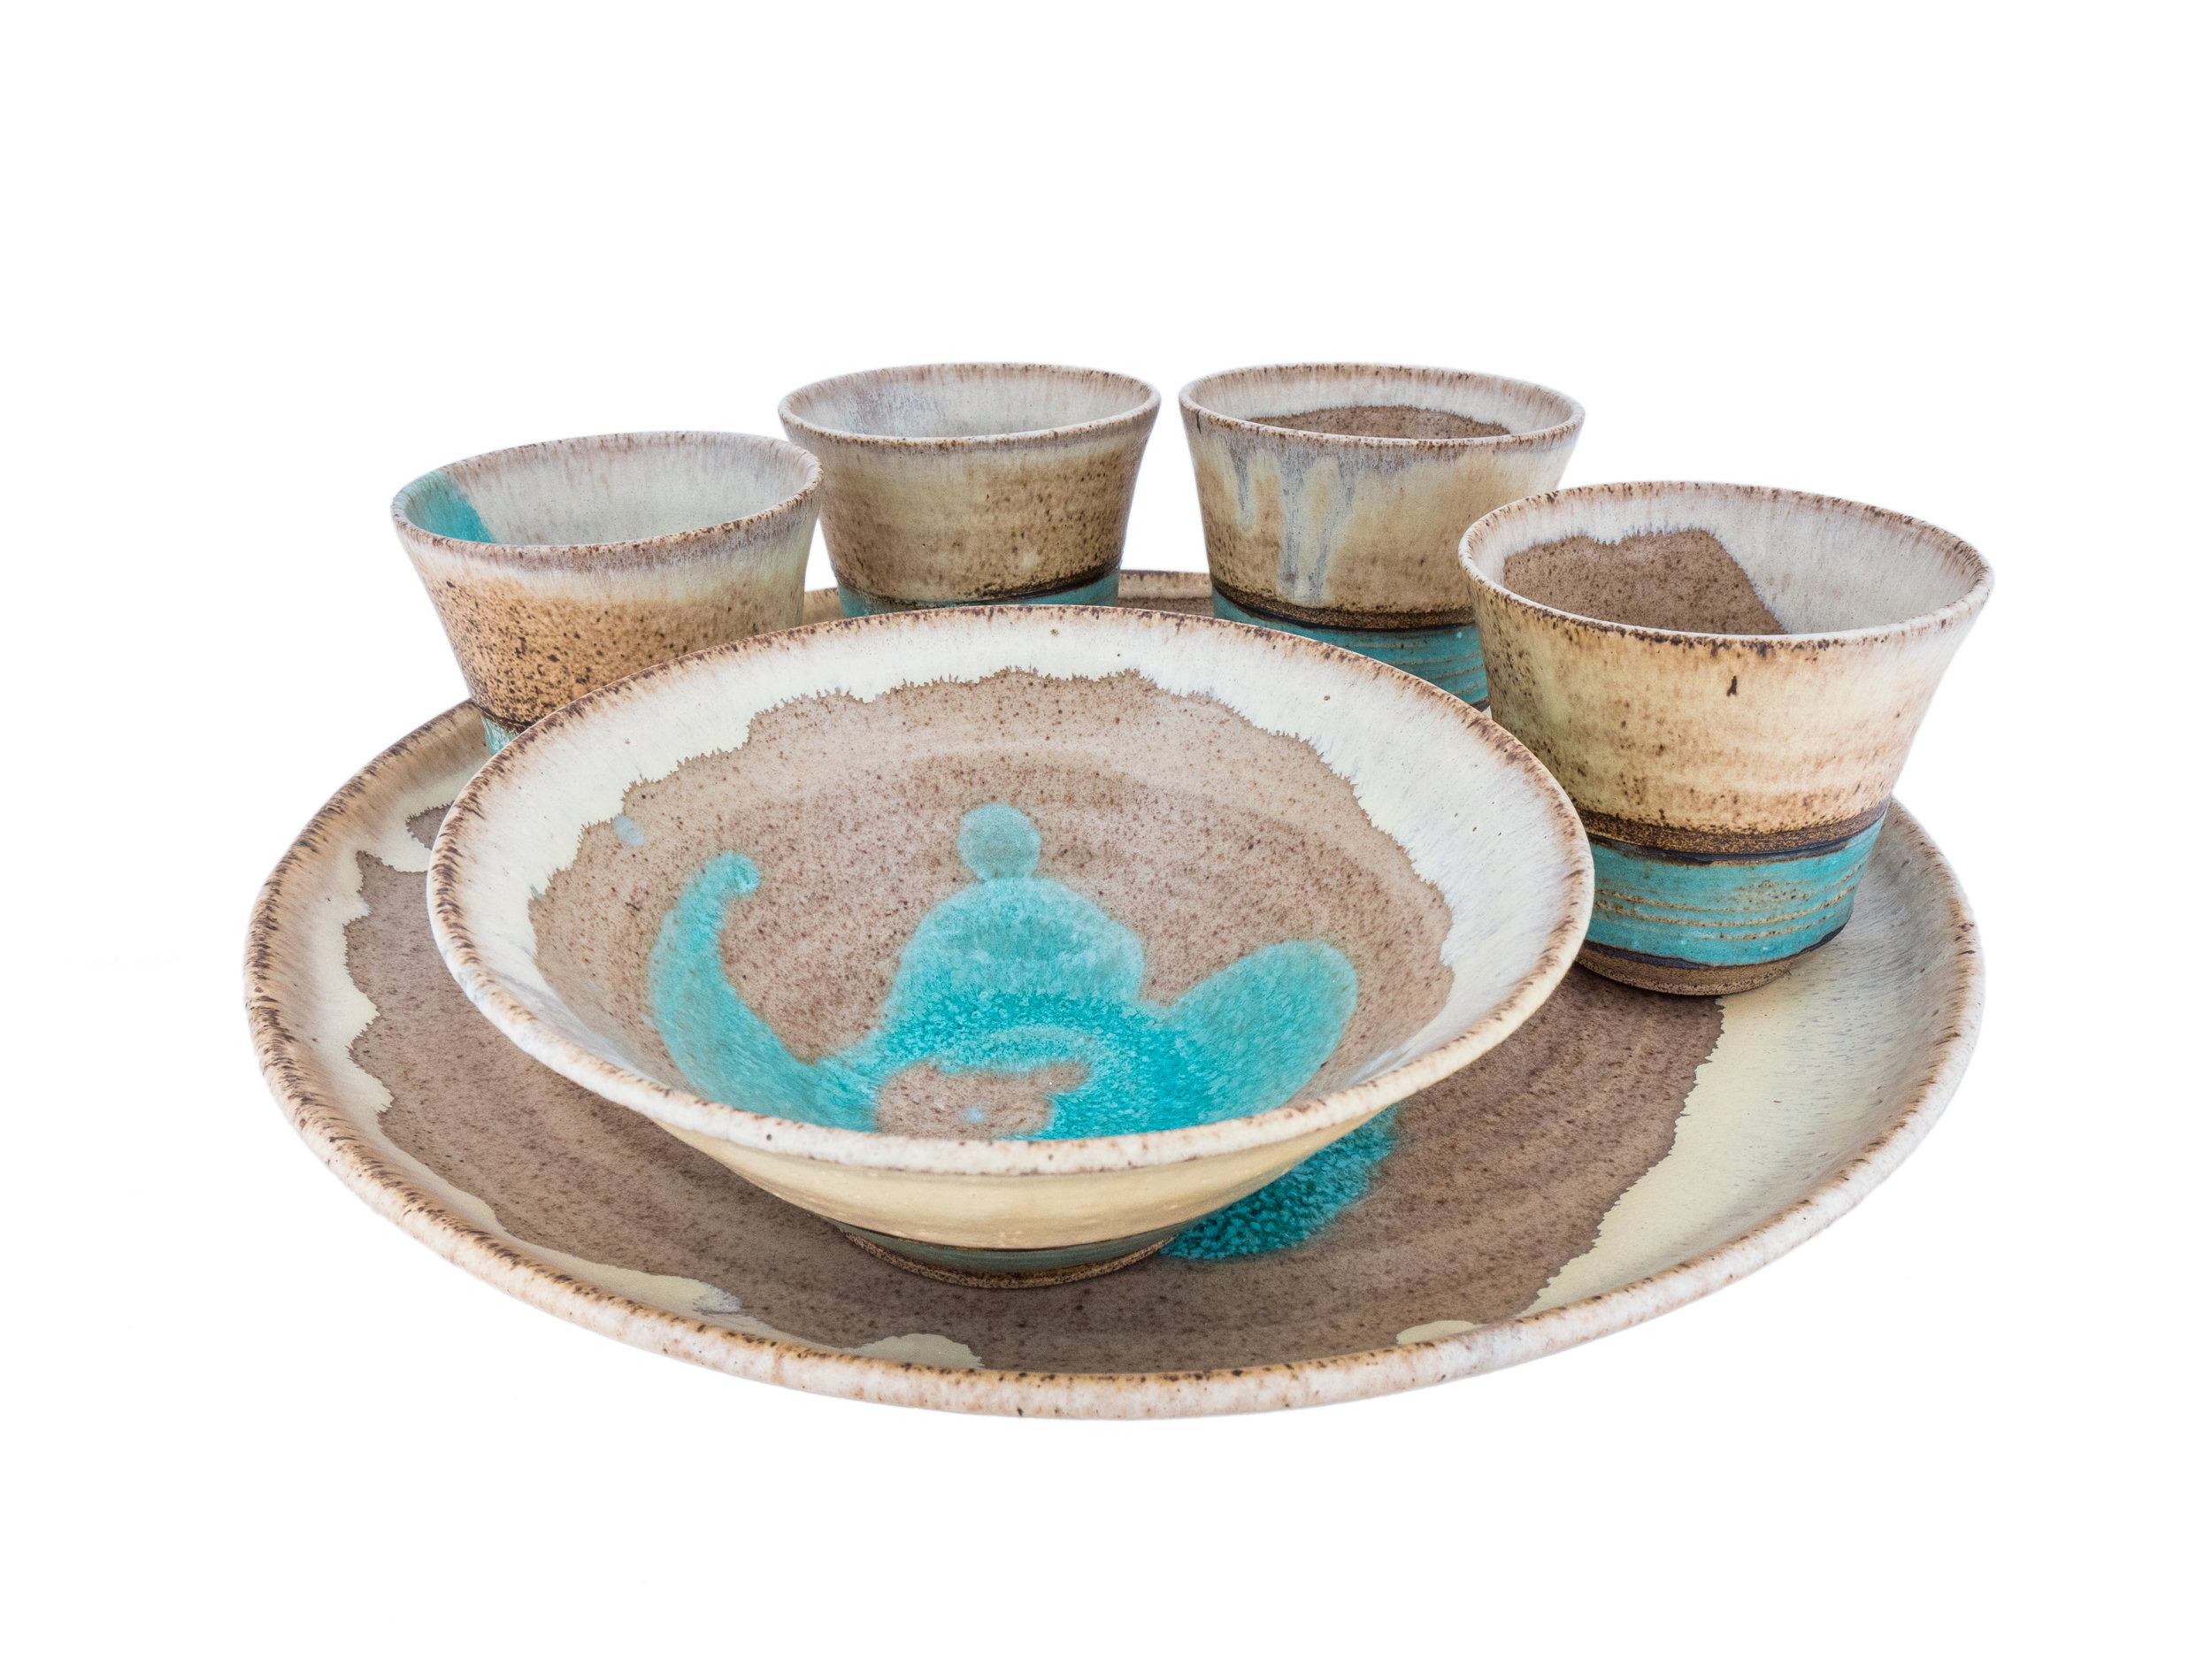 Earth_And_Soul_Pottery_Products_2018_P1110510.jpg